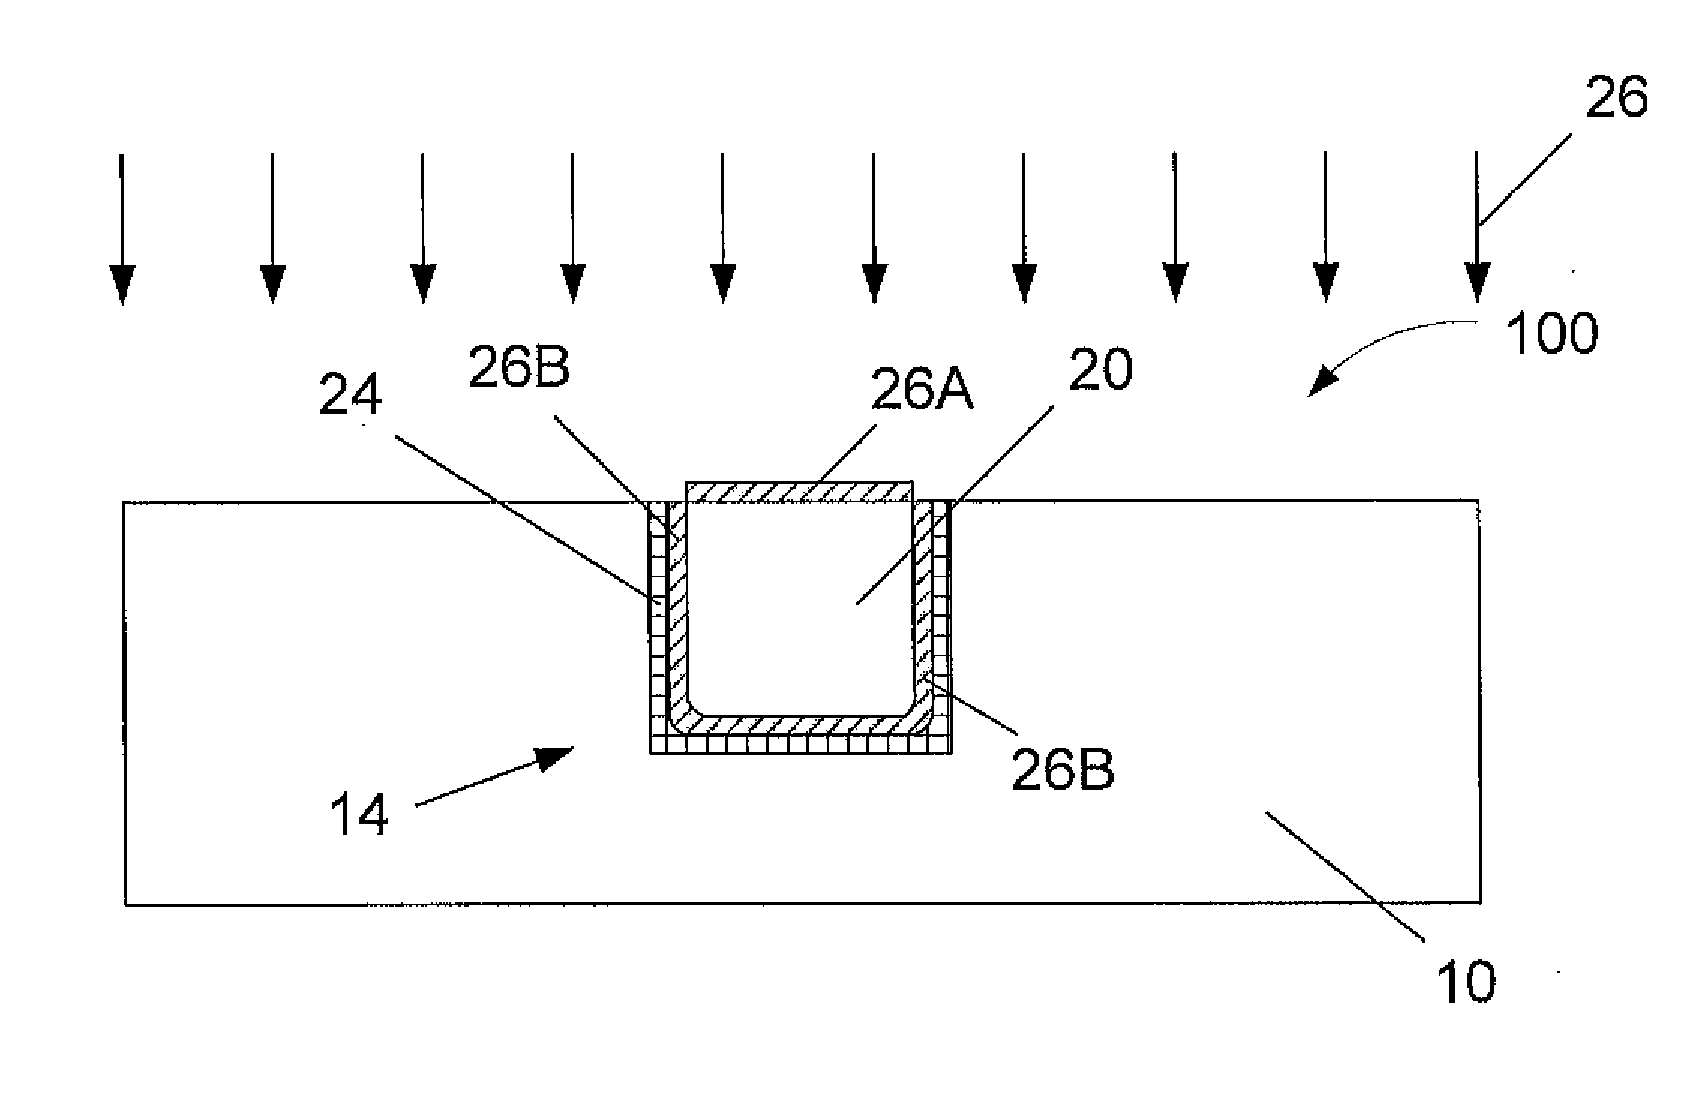 Methods of forming graphene liners and/or cap layers on copper-based conductive structures